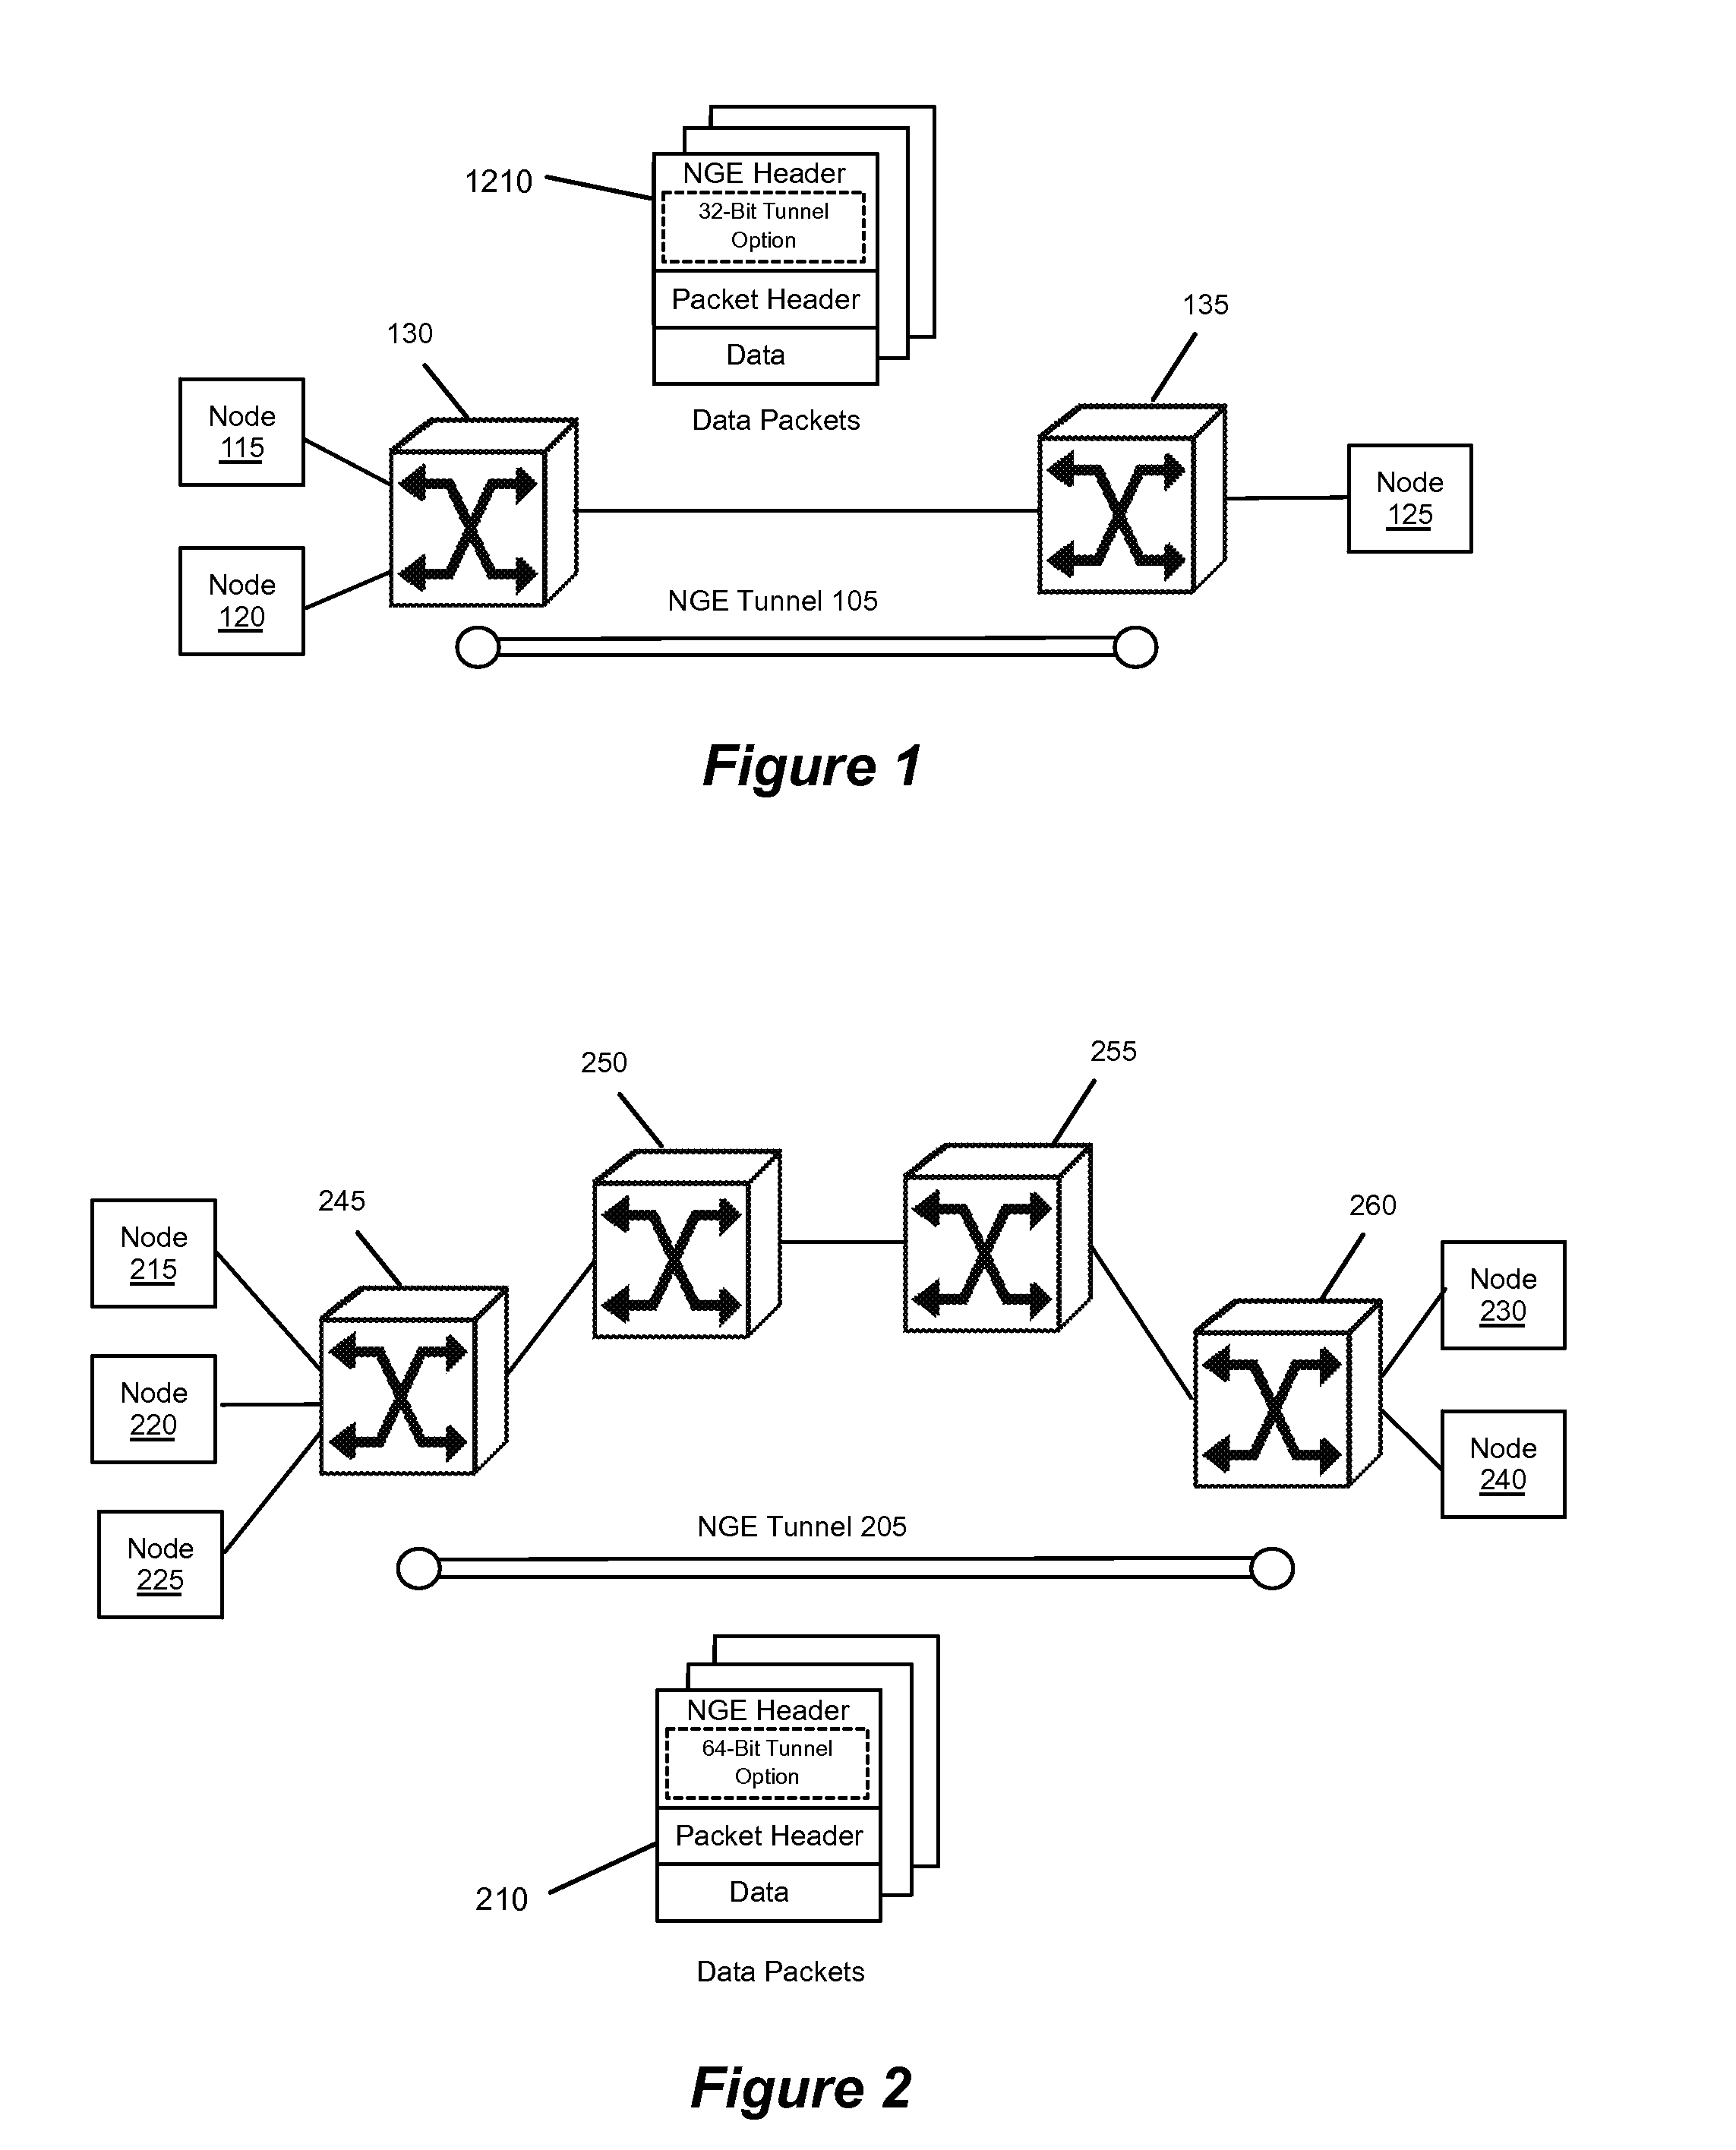 Encapsulating Data Packets Using an Adaptive Tunnelling Protocol